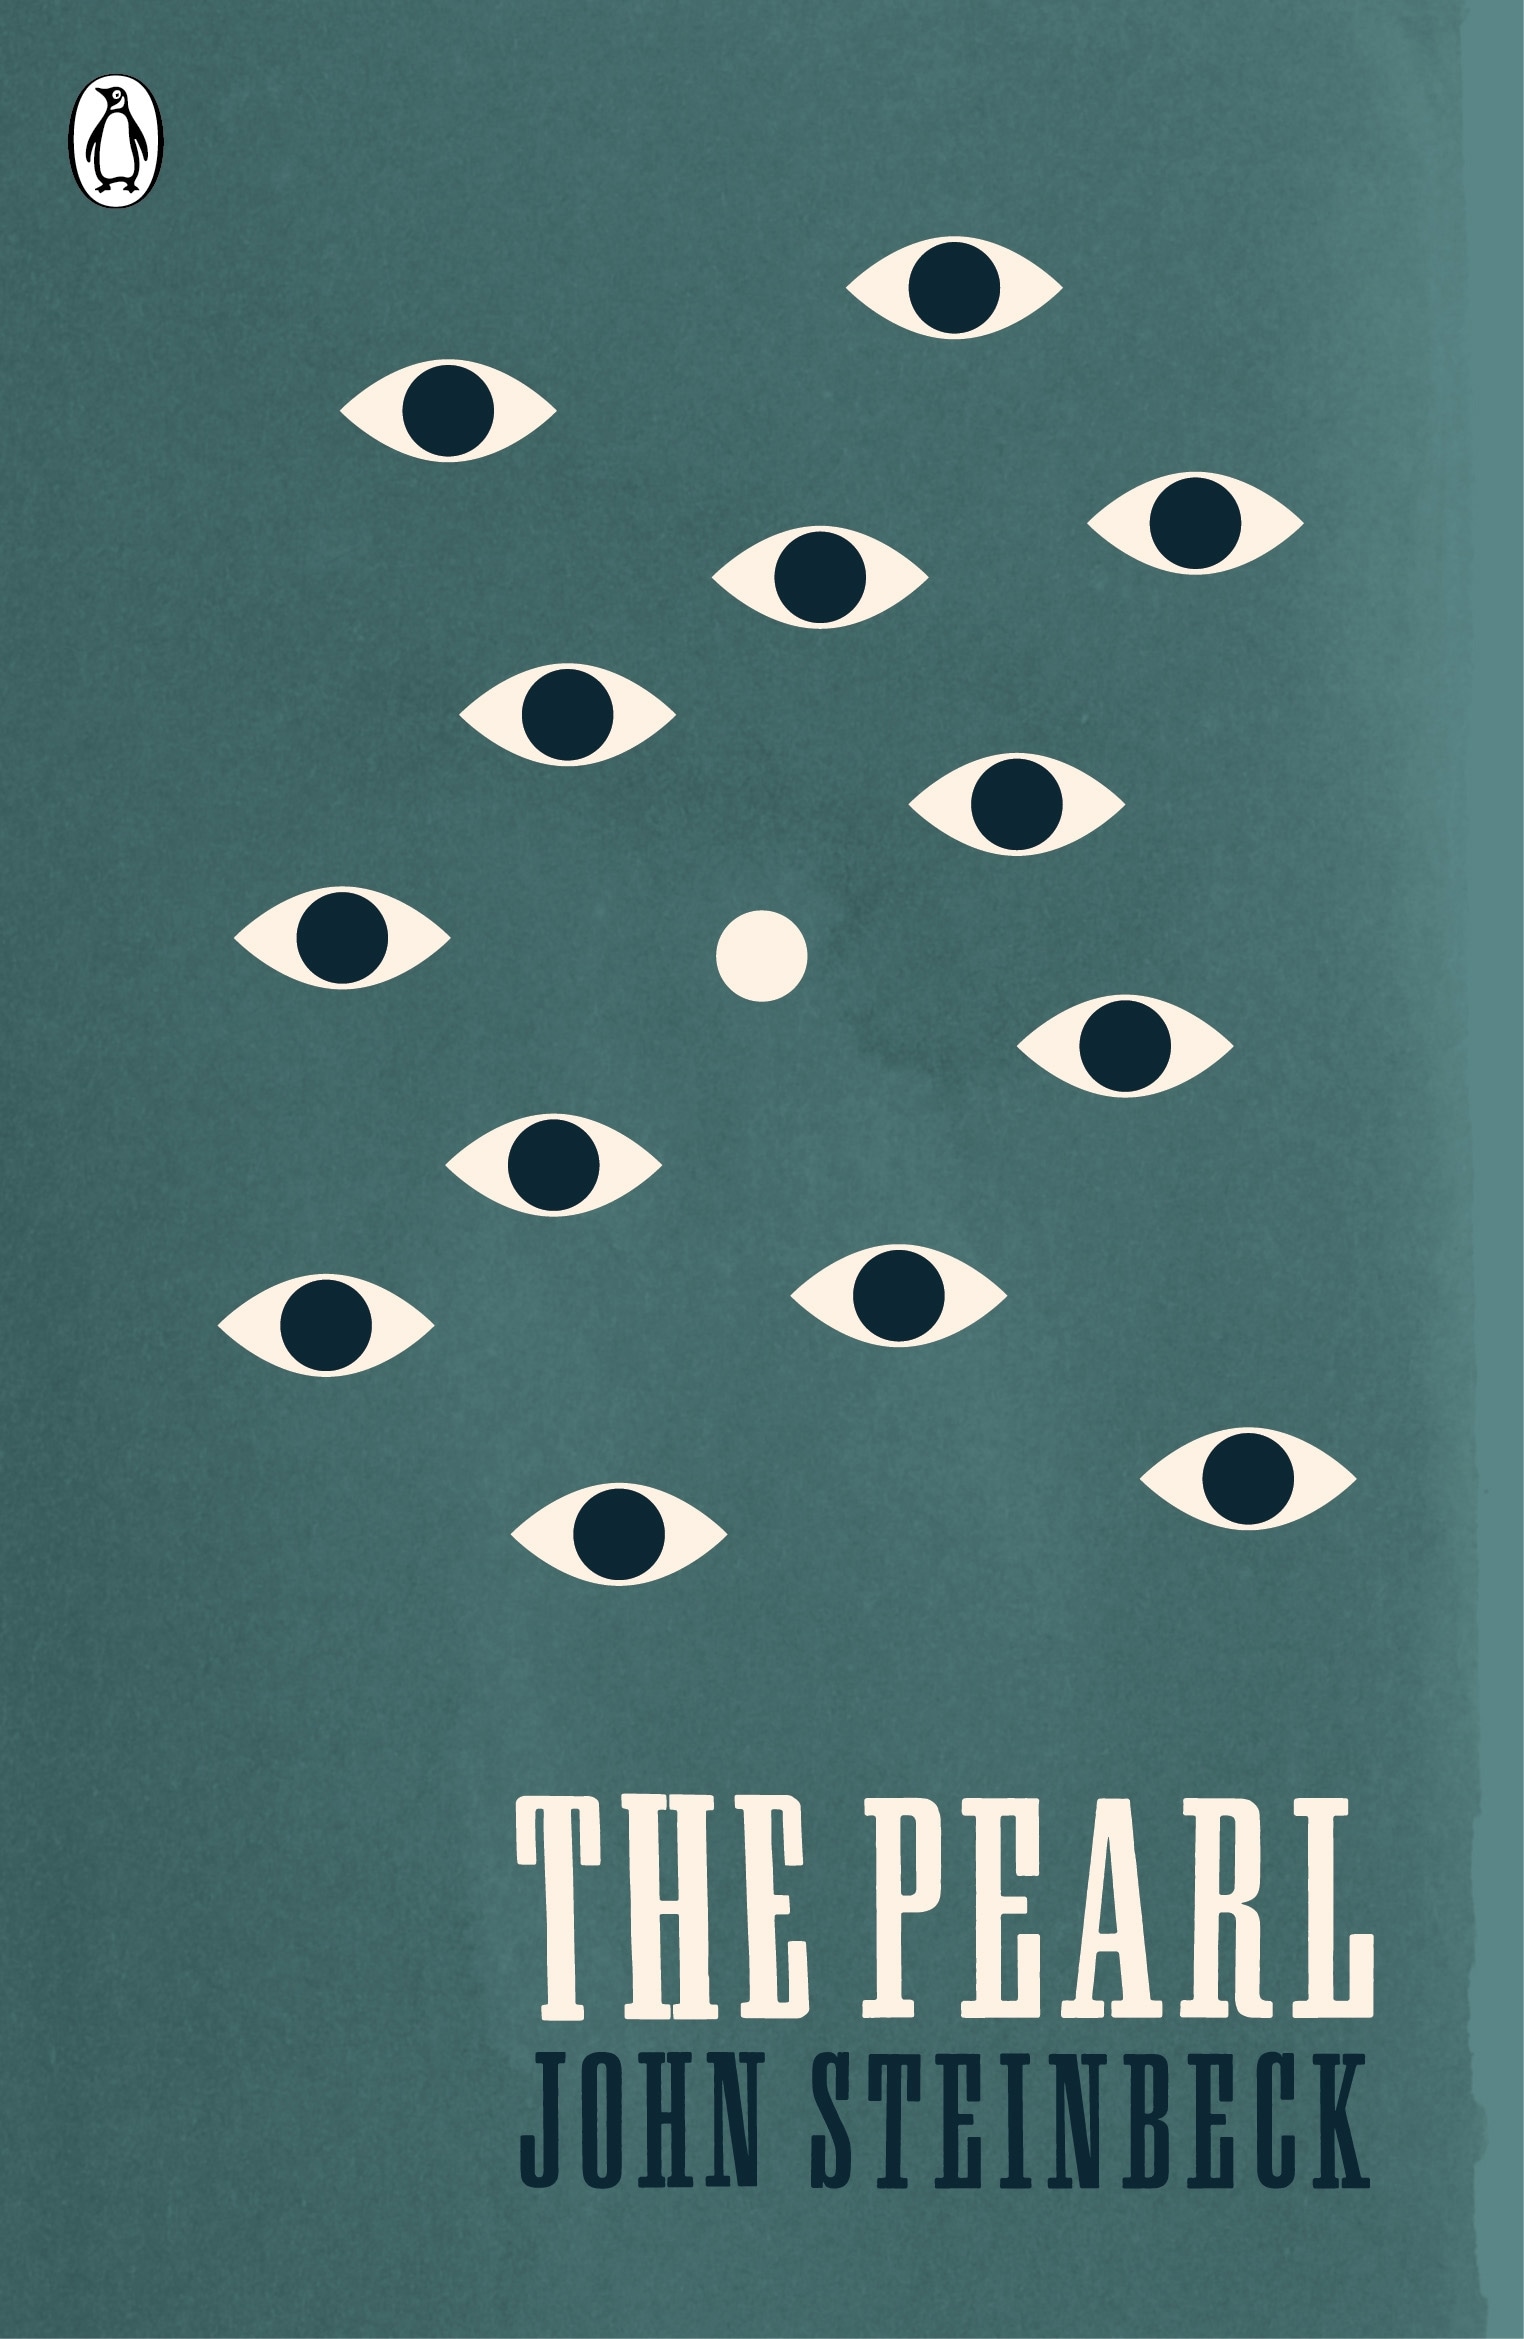 Book “The Pearl” by John Steinbeck — August 4, 2016